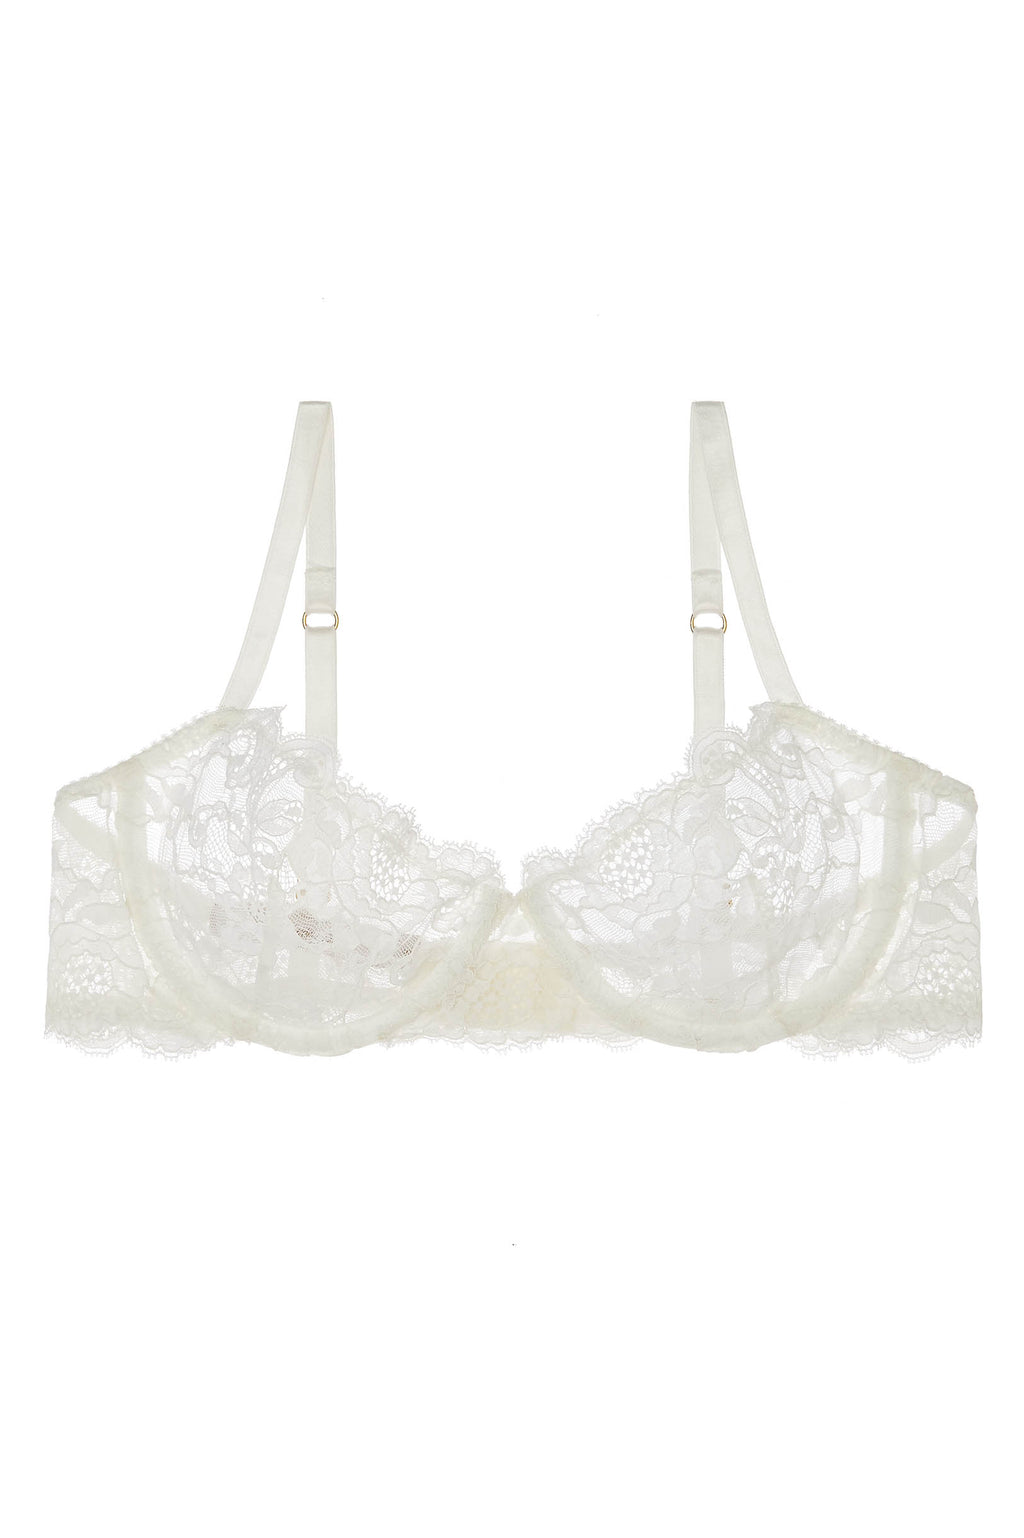 Peony French lace underwire balconette demi cup bra ...